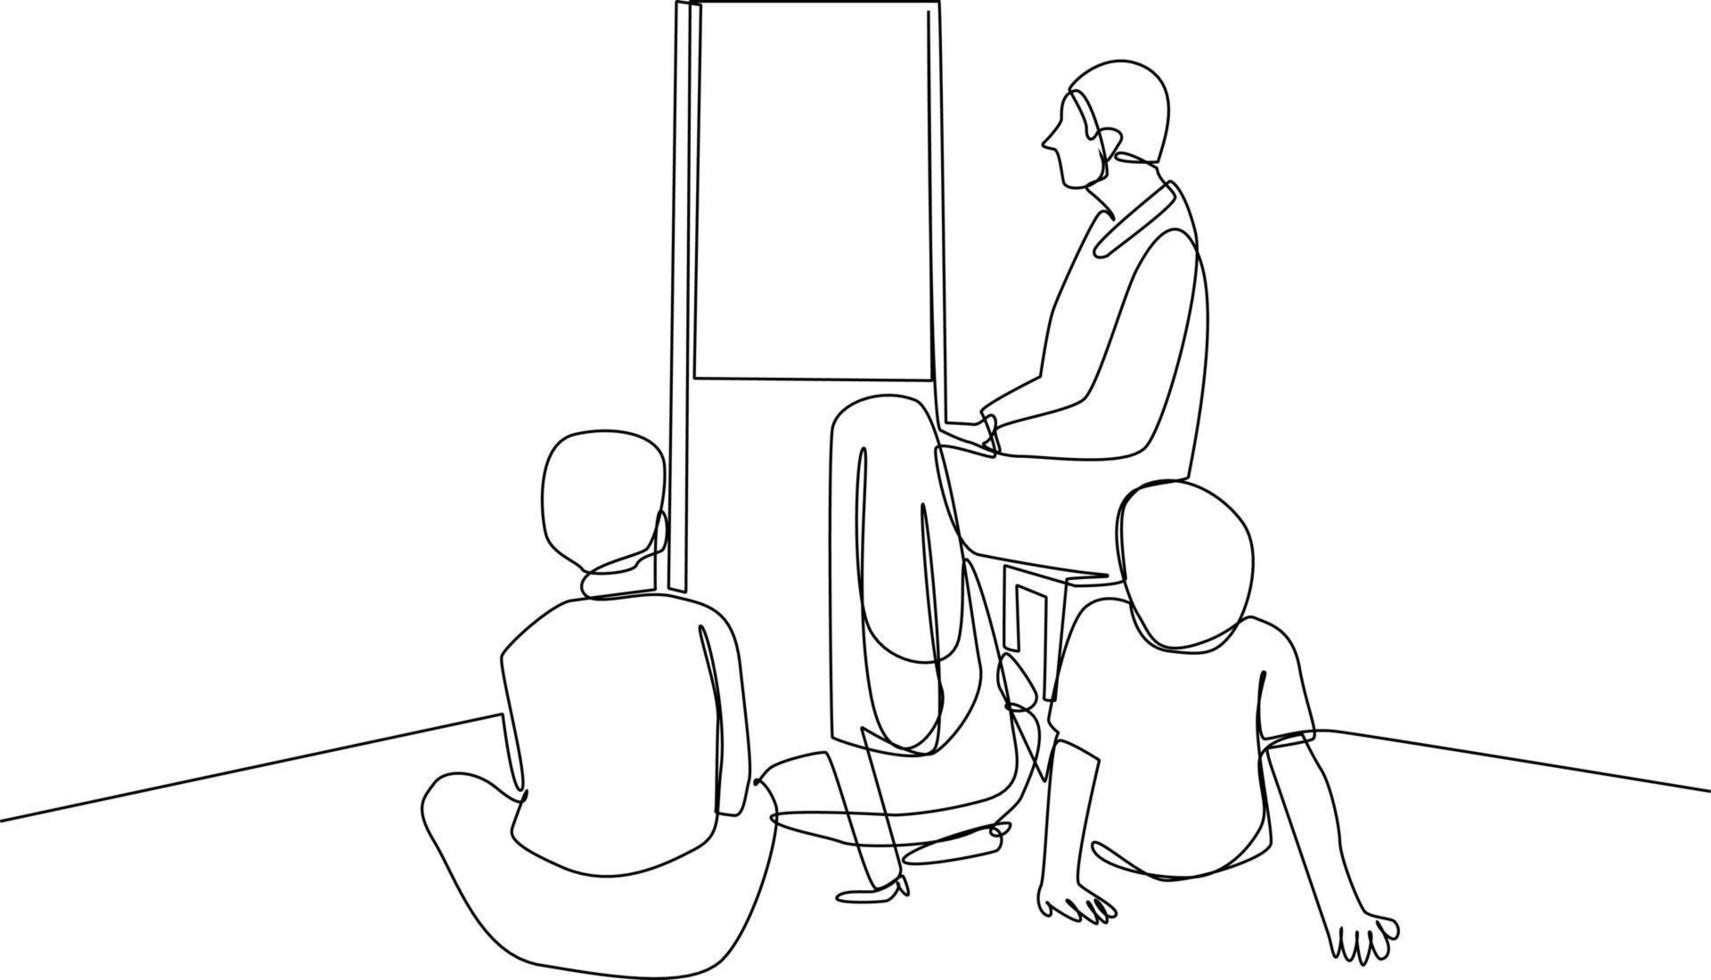 Single one-line drawing teacher and students study casually in class. Class in session concept. Continuous line drawing design graphic vector illustration.